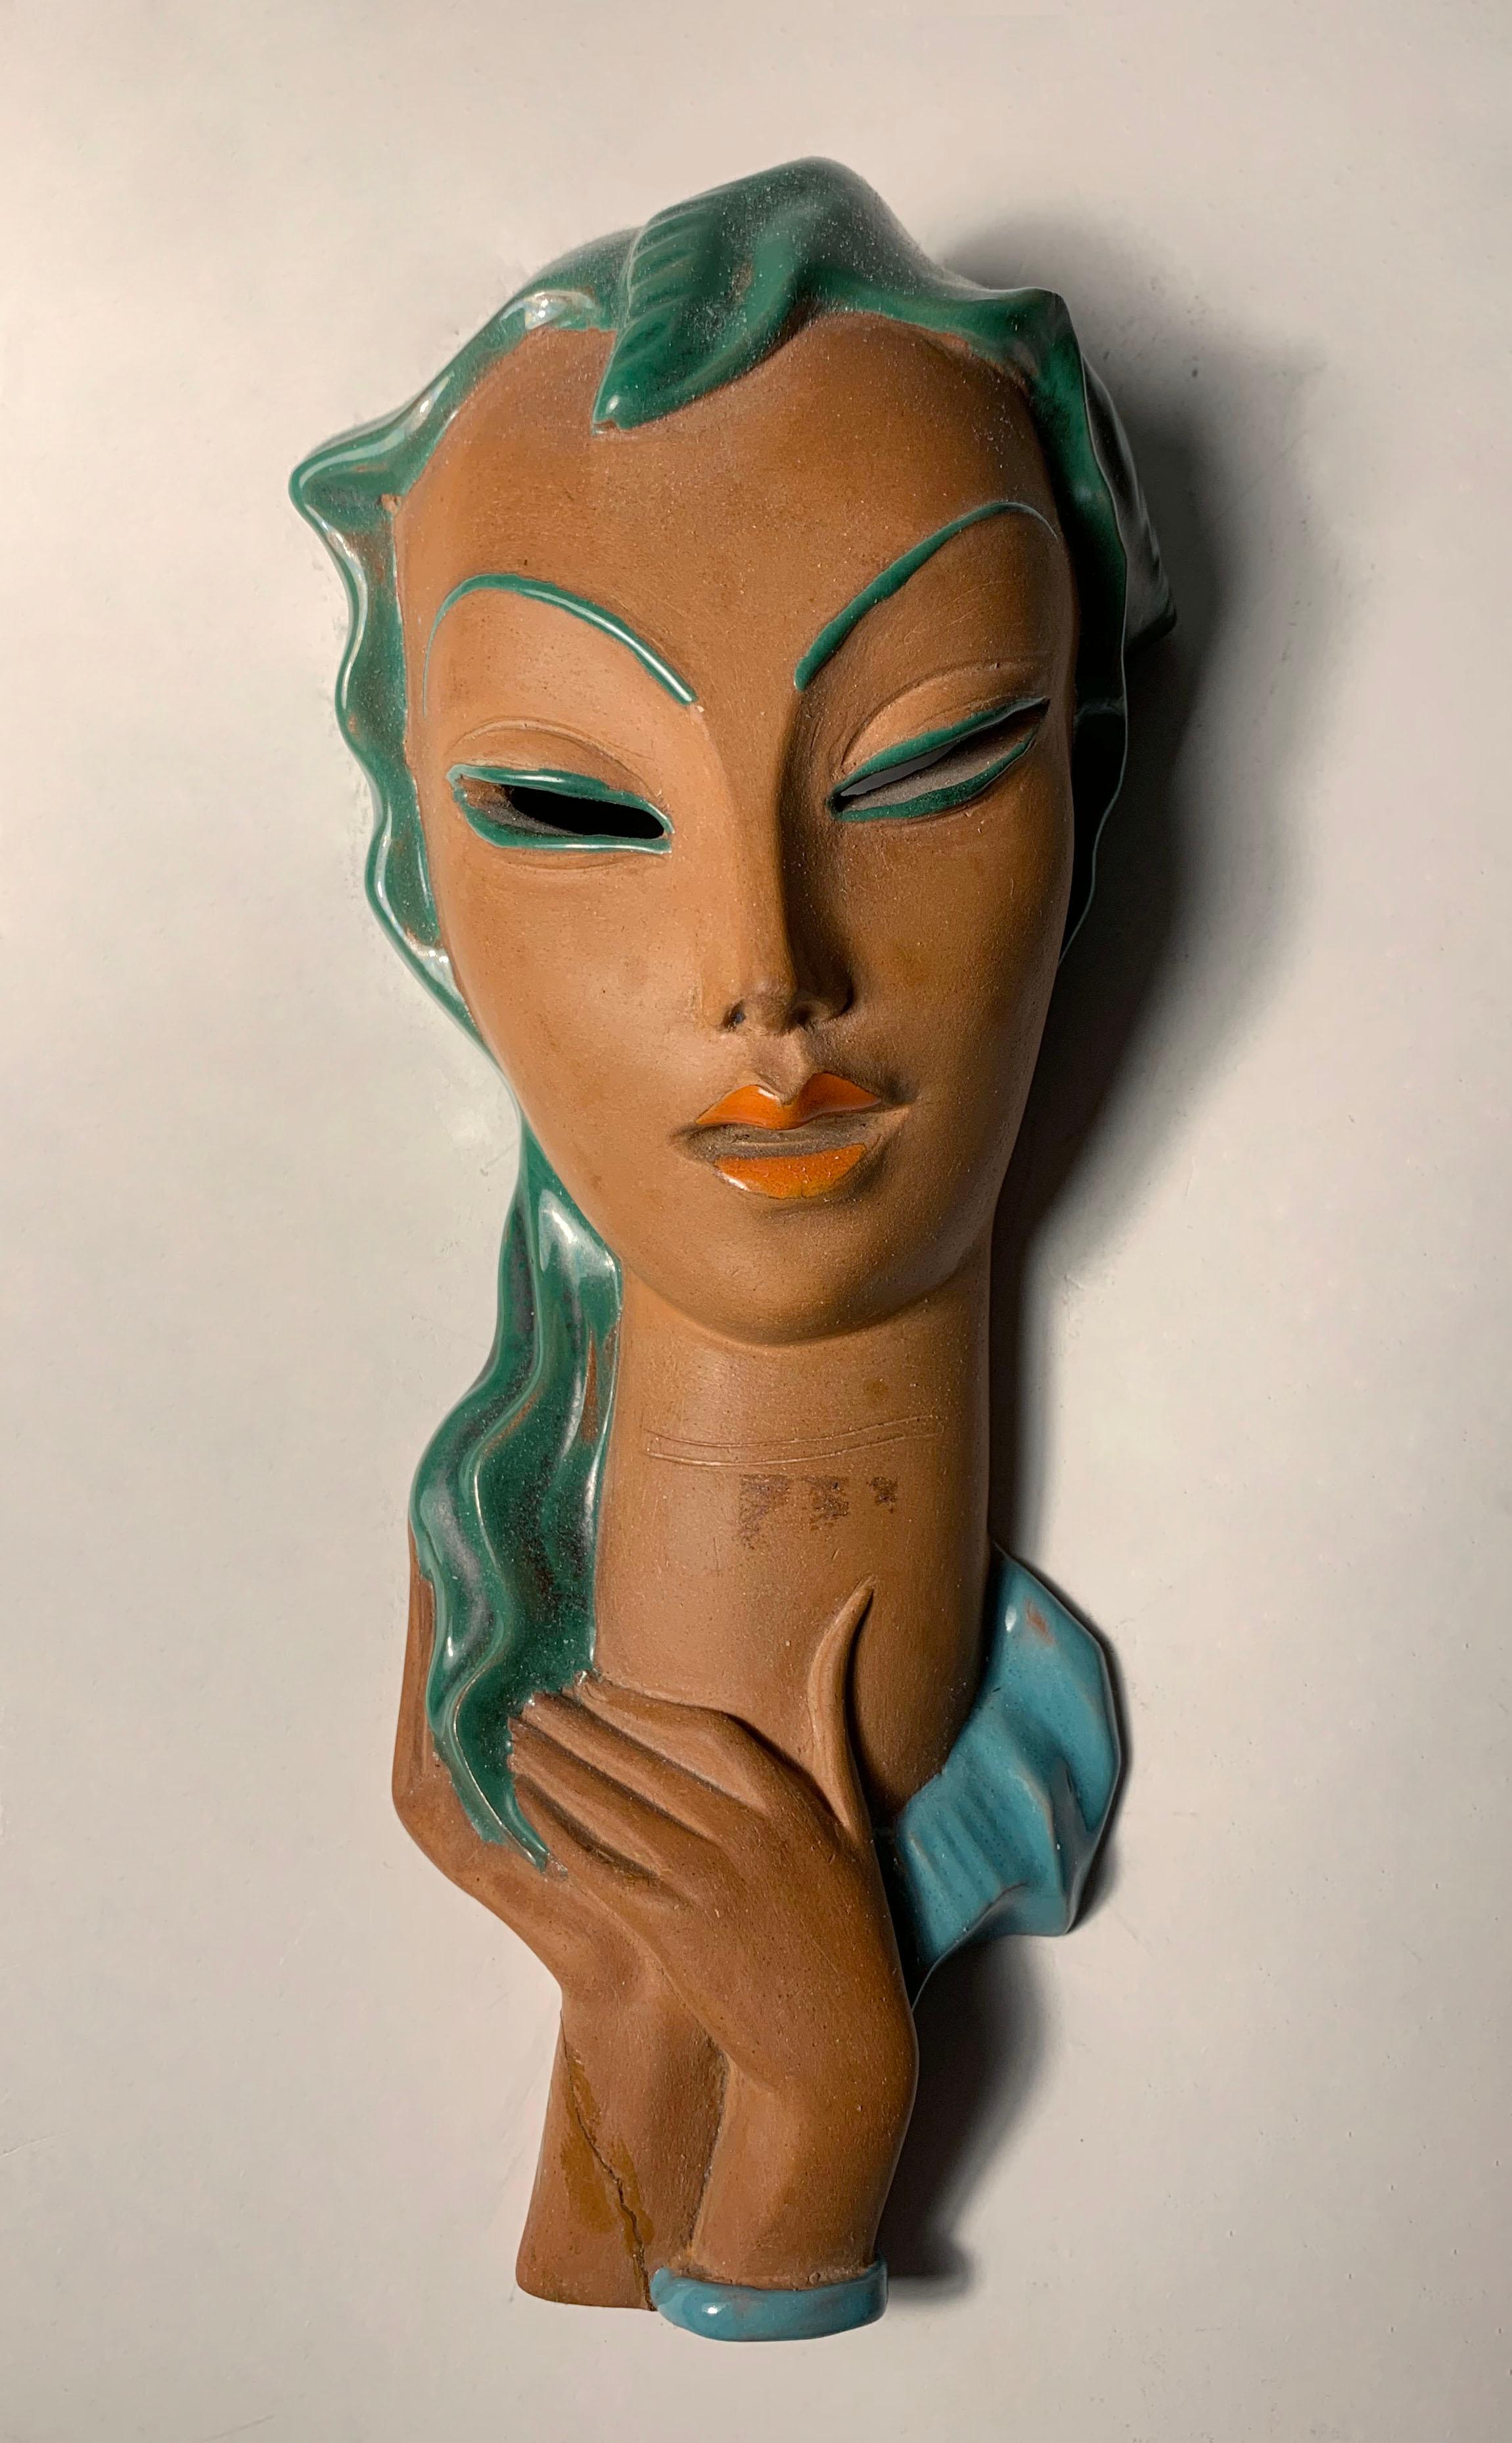 An Italian ceramic Art Deco hanging wall mask bust of a woman. Similar to the works of Goldsheider. This mask is marked Italy on backside along with what seems be a makers mark and model number.

At some point in time someone repaired the piece in